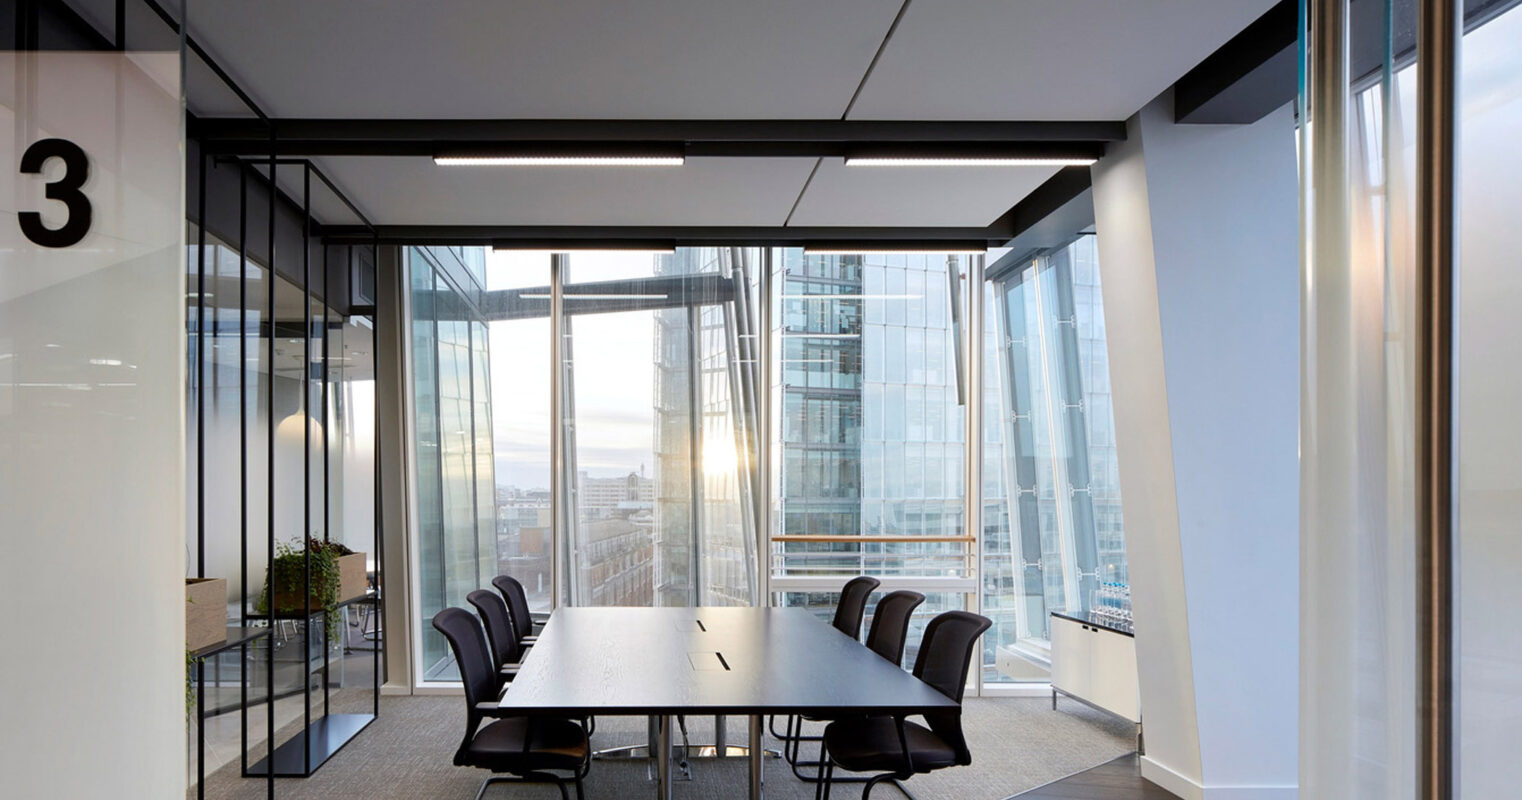 Modern conference room featuring a large, rectangular table with black chairs, expansive windows with city views, sleek overhead lighting, and glass partition walls enhancing an open, airy atmosphere.